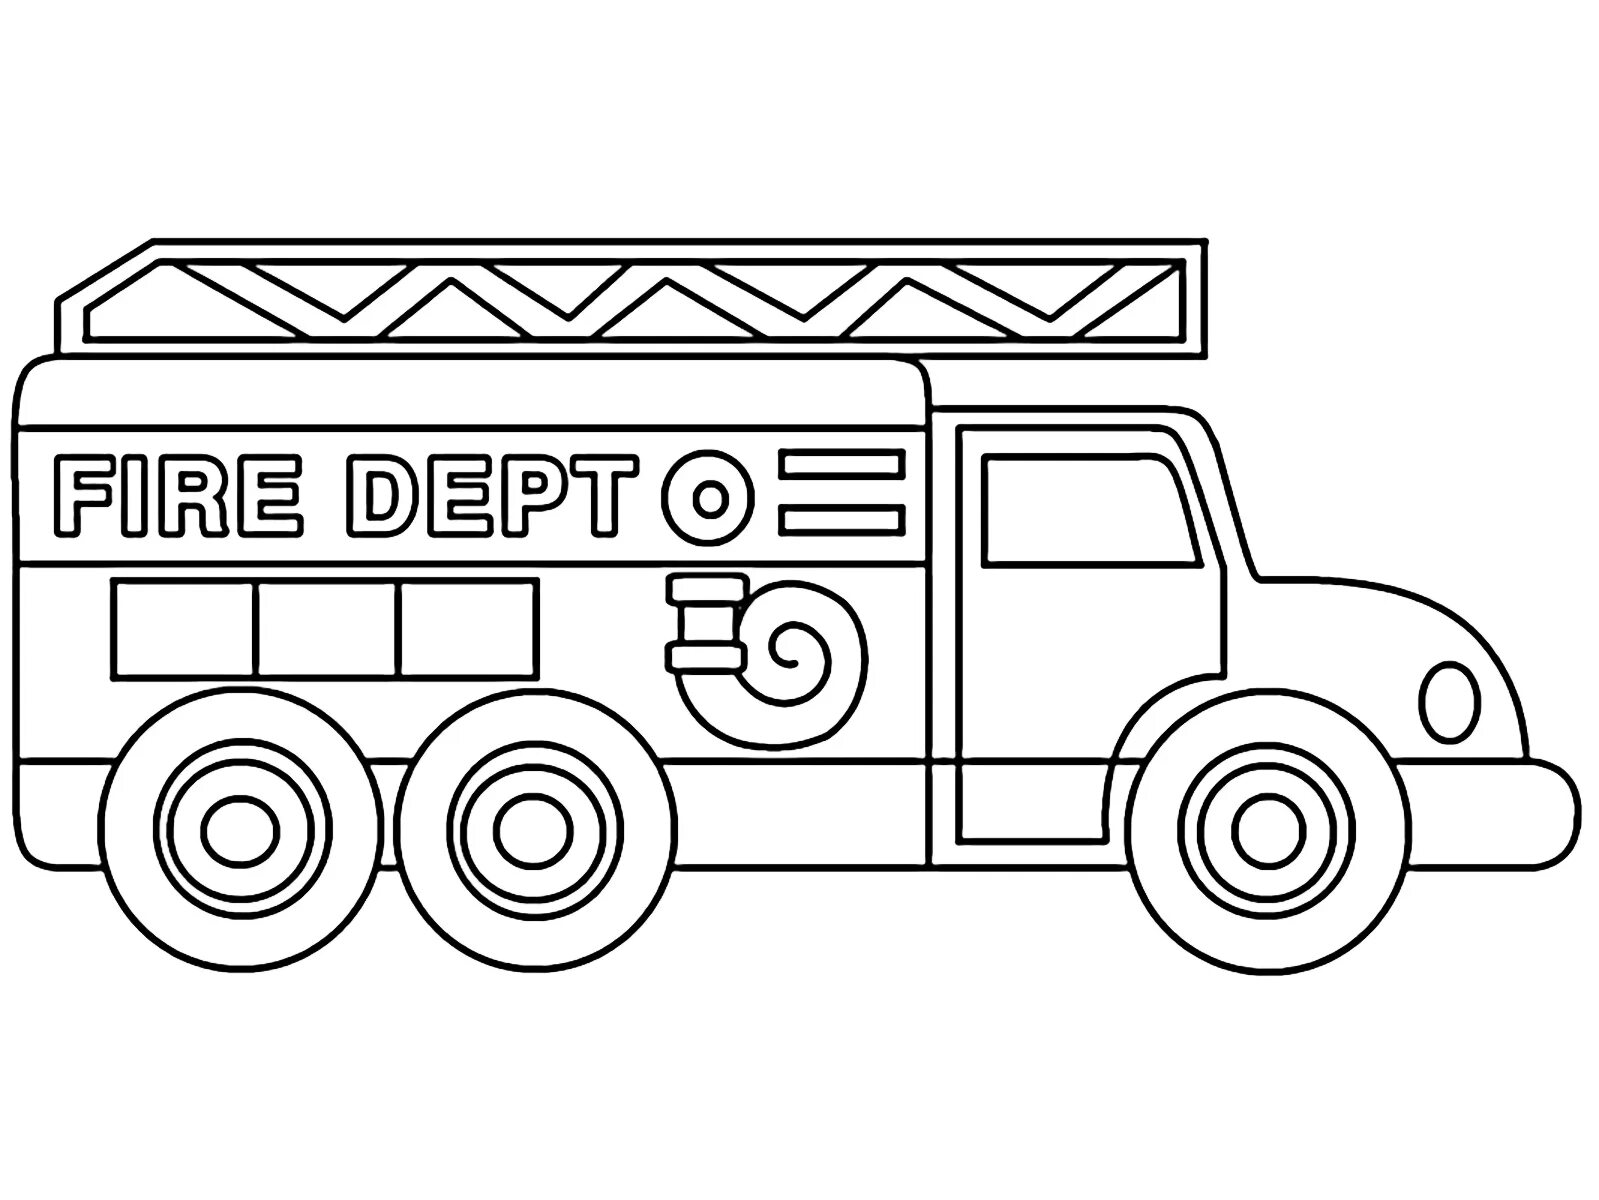 Fantastic fire truck coloring pages for kids